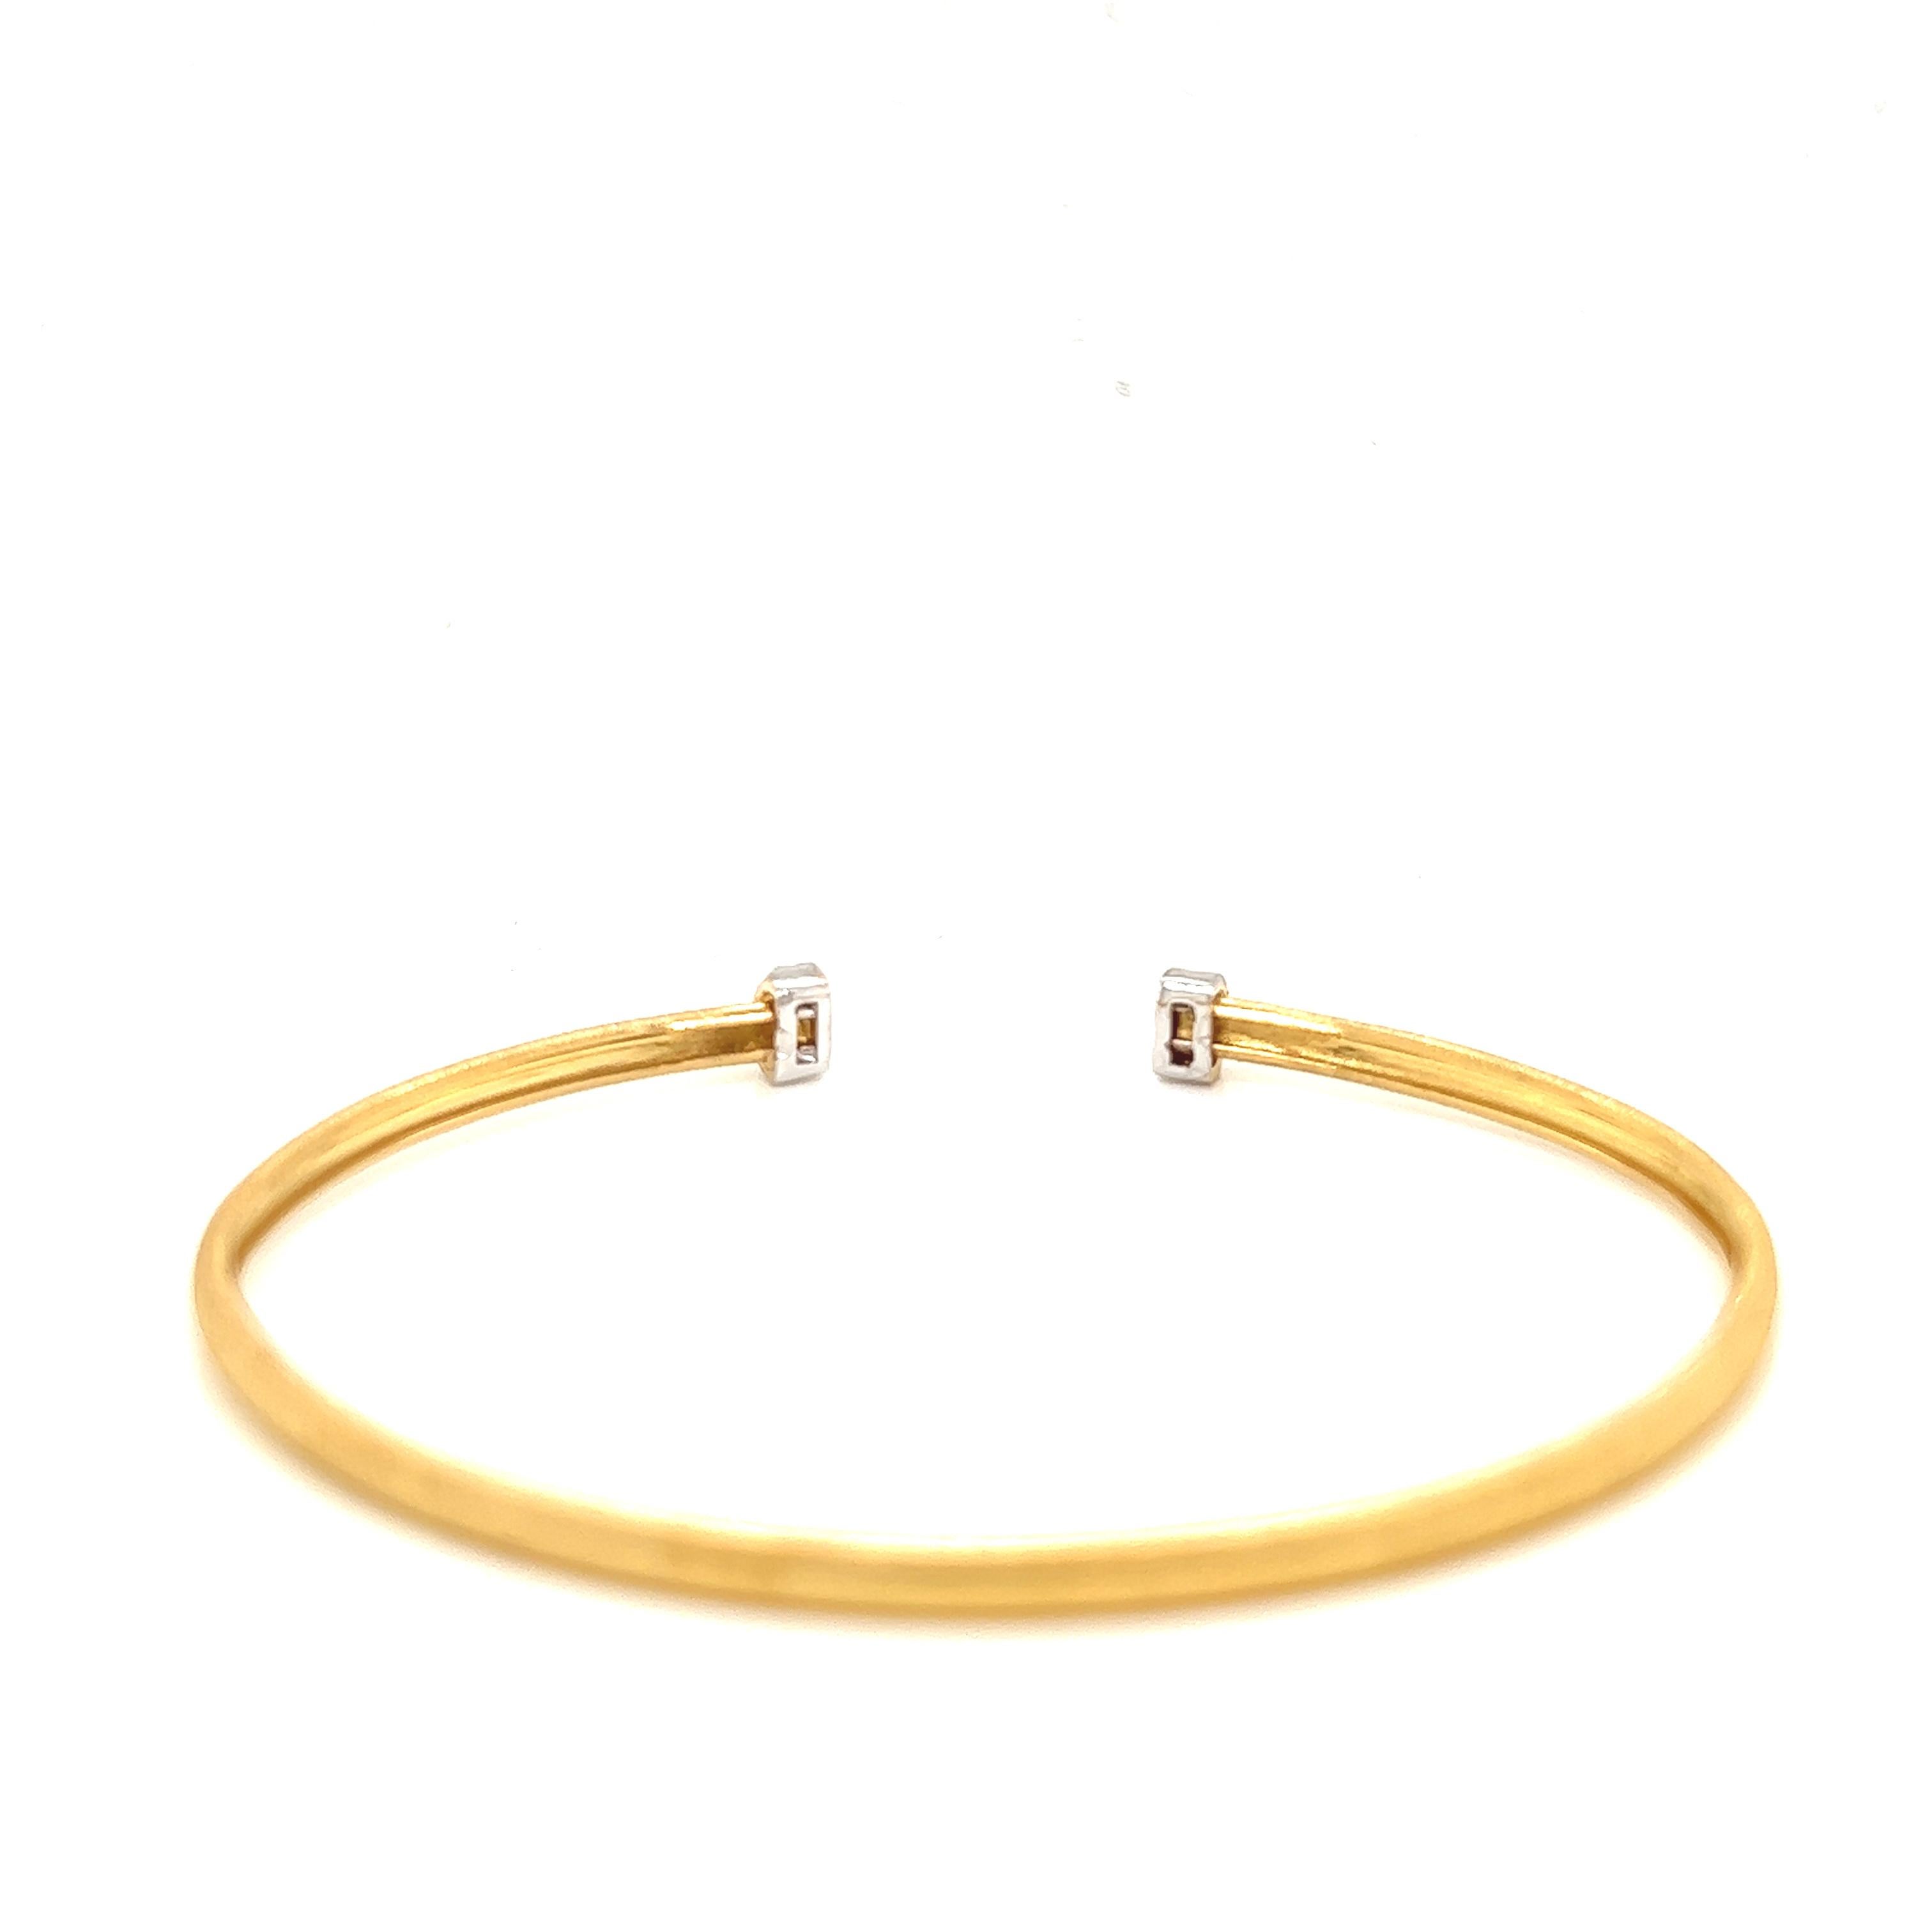 Round Cut Hand-Crafted 14K Yellow Gold Satin-Finished Bangle Bracelet For Sale